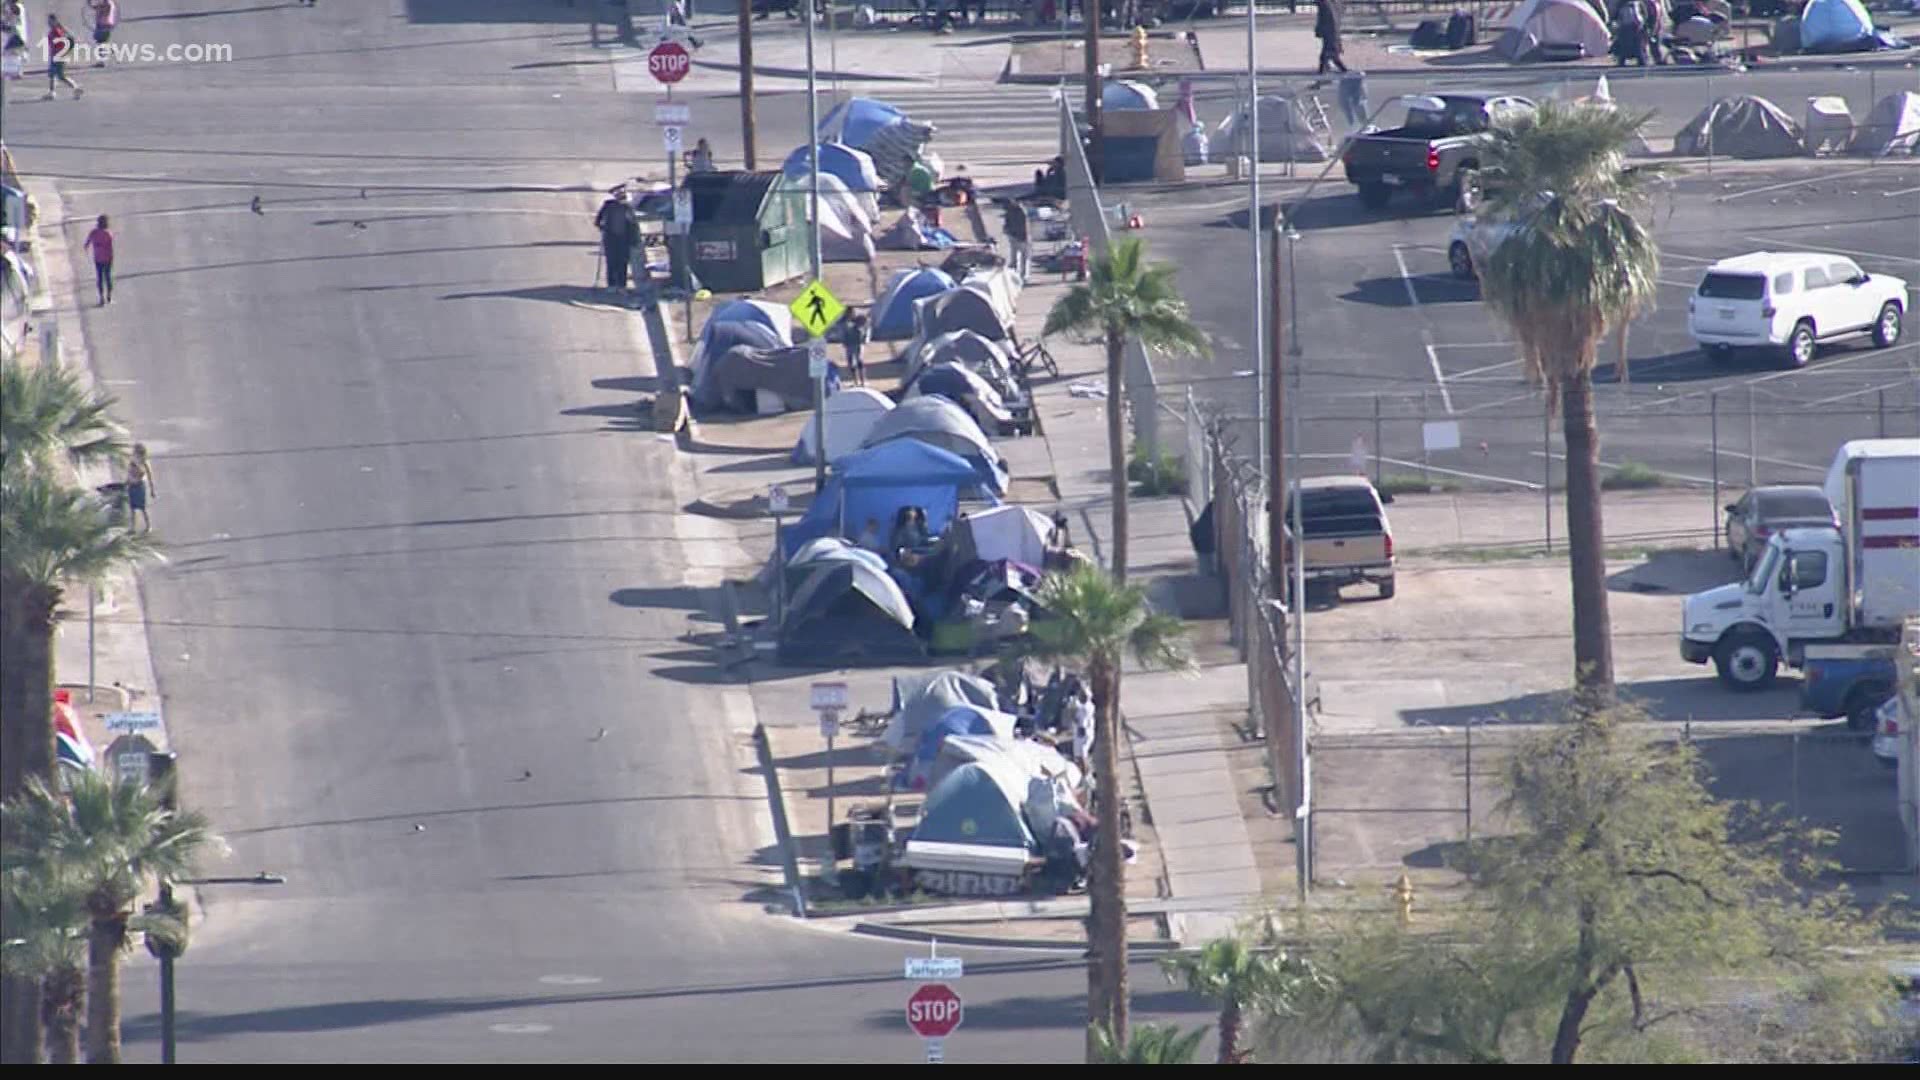 Temporary homeless camp in Phoenix is being phased out | 12news.com